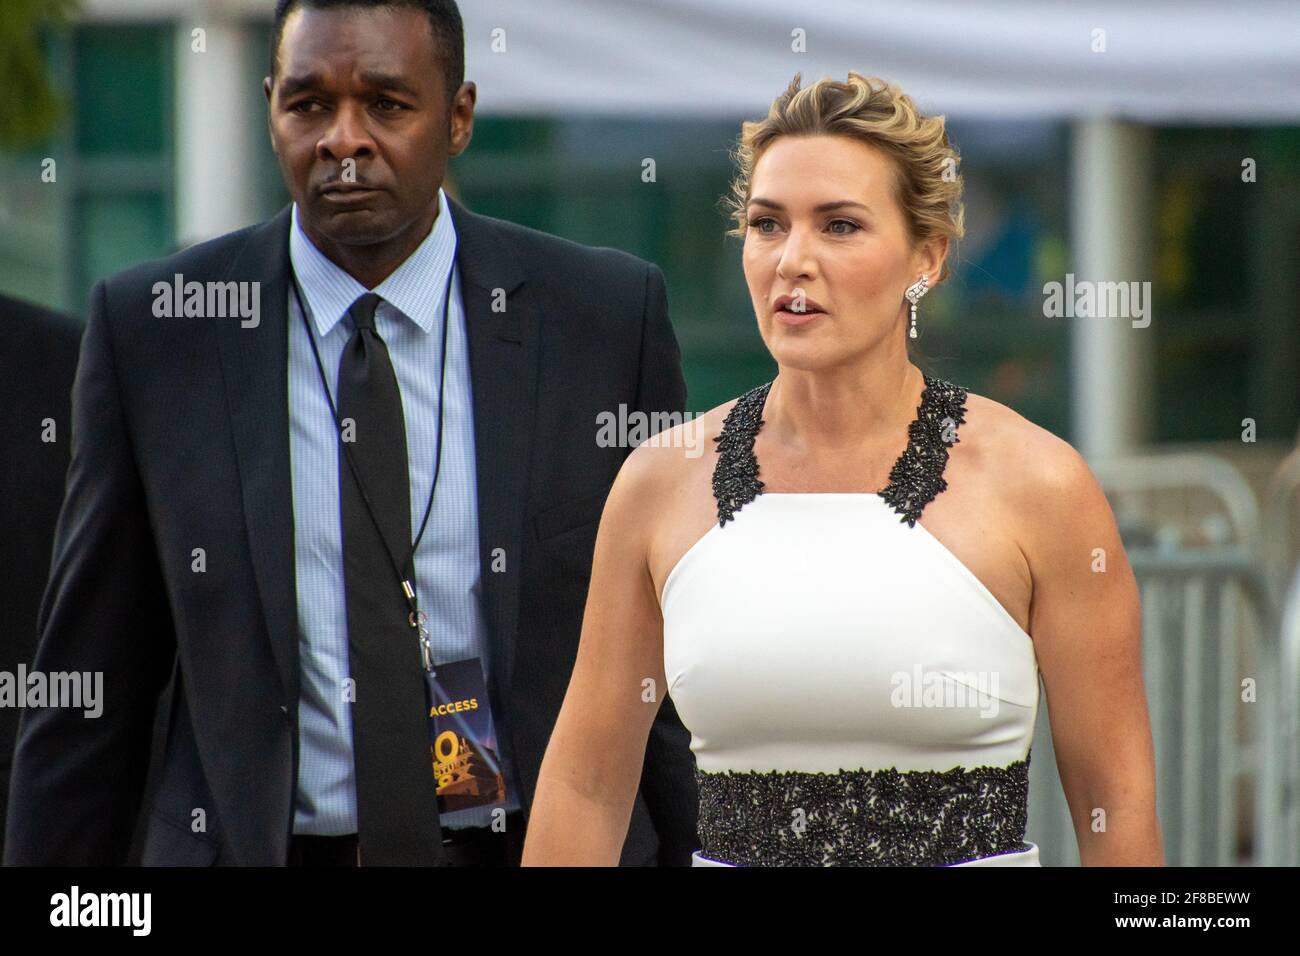 Actress Kate Winslet during the Toronto International Film Festival in Toronto, Canada, the Year 2017 Stock Photo